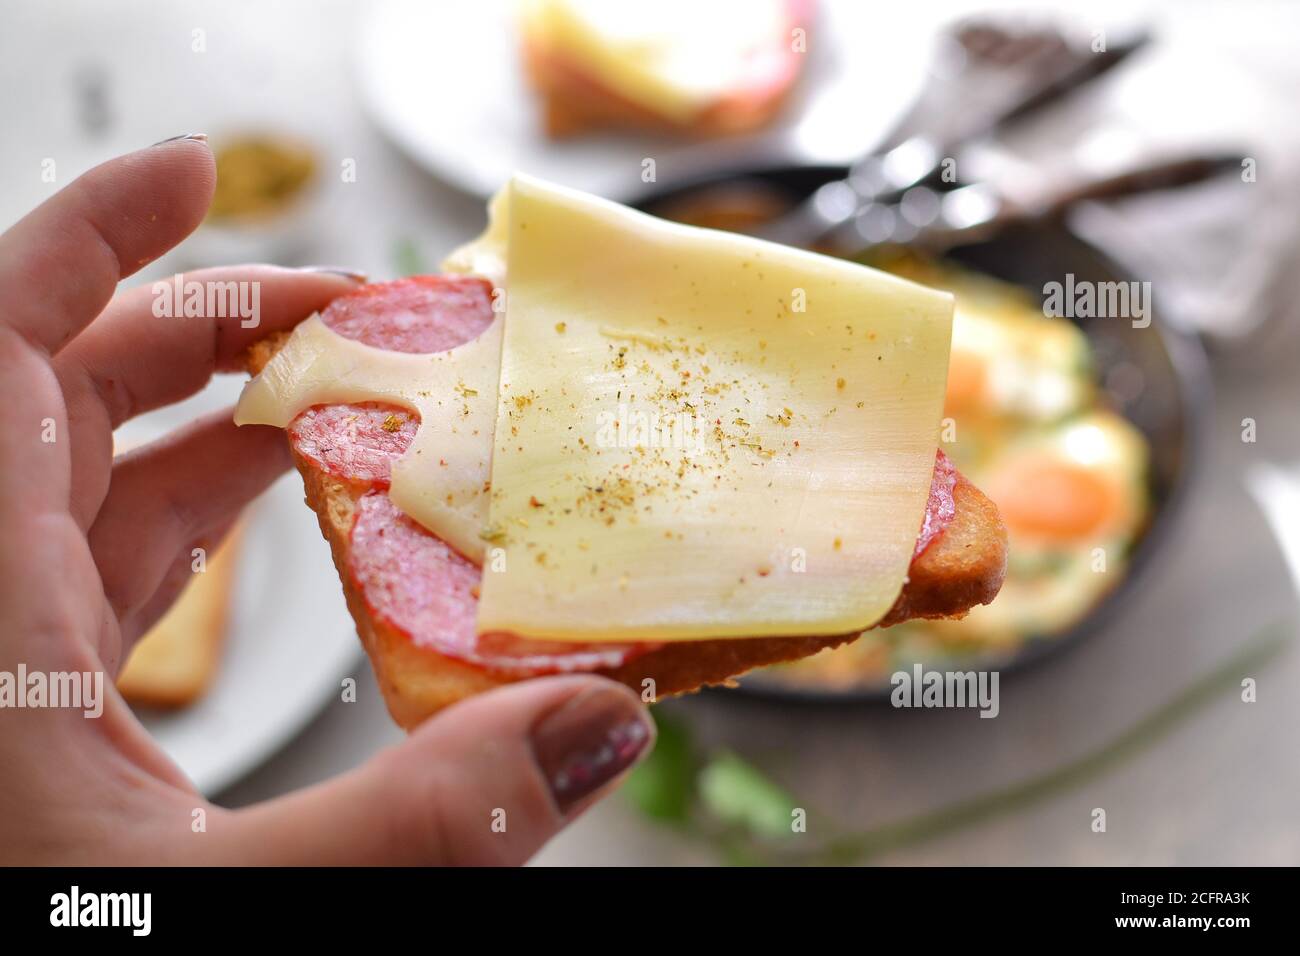 Delicious fast food breakfast. Crispy Toast with cheese and sausage. Sandwich in a white plate Light background. Minimalistic food photo. A woman Stock Photo